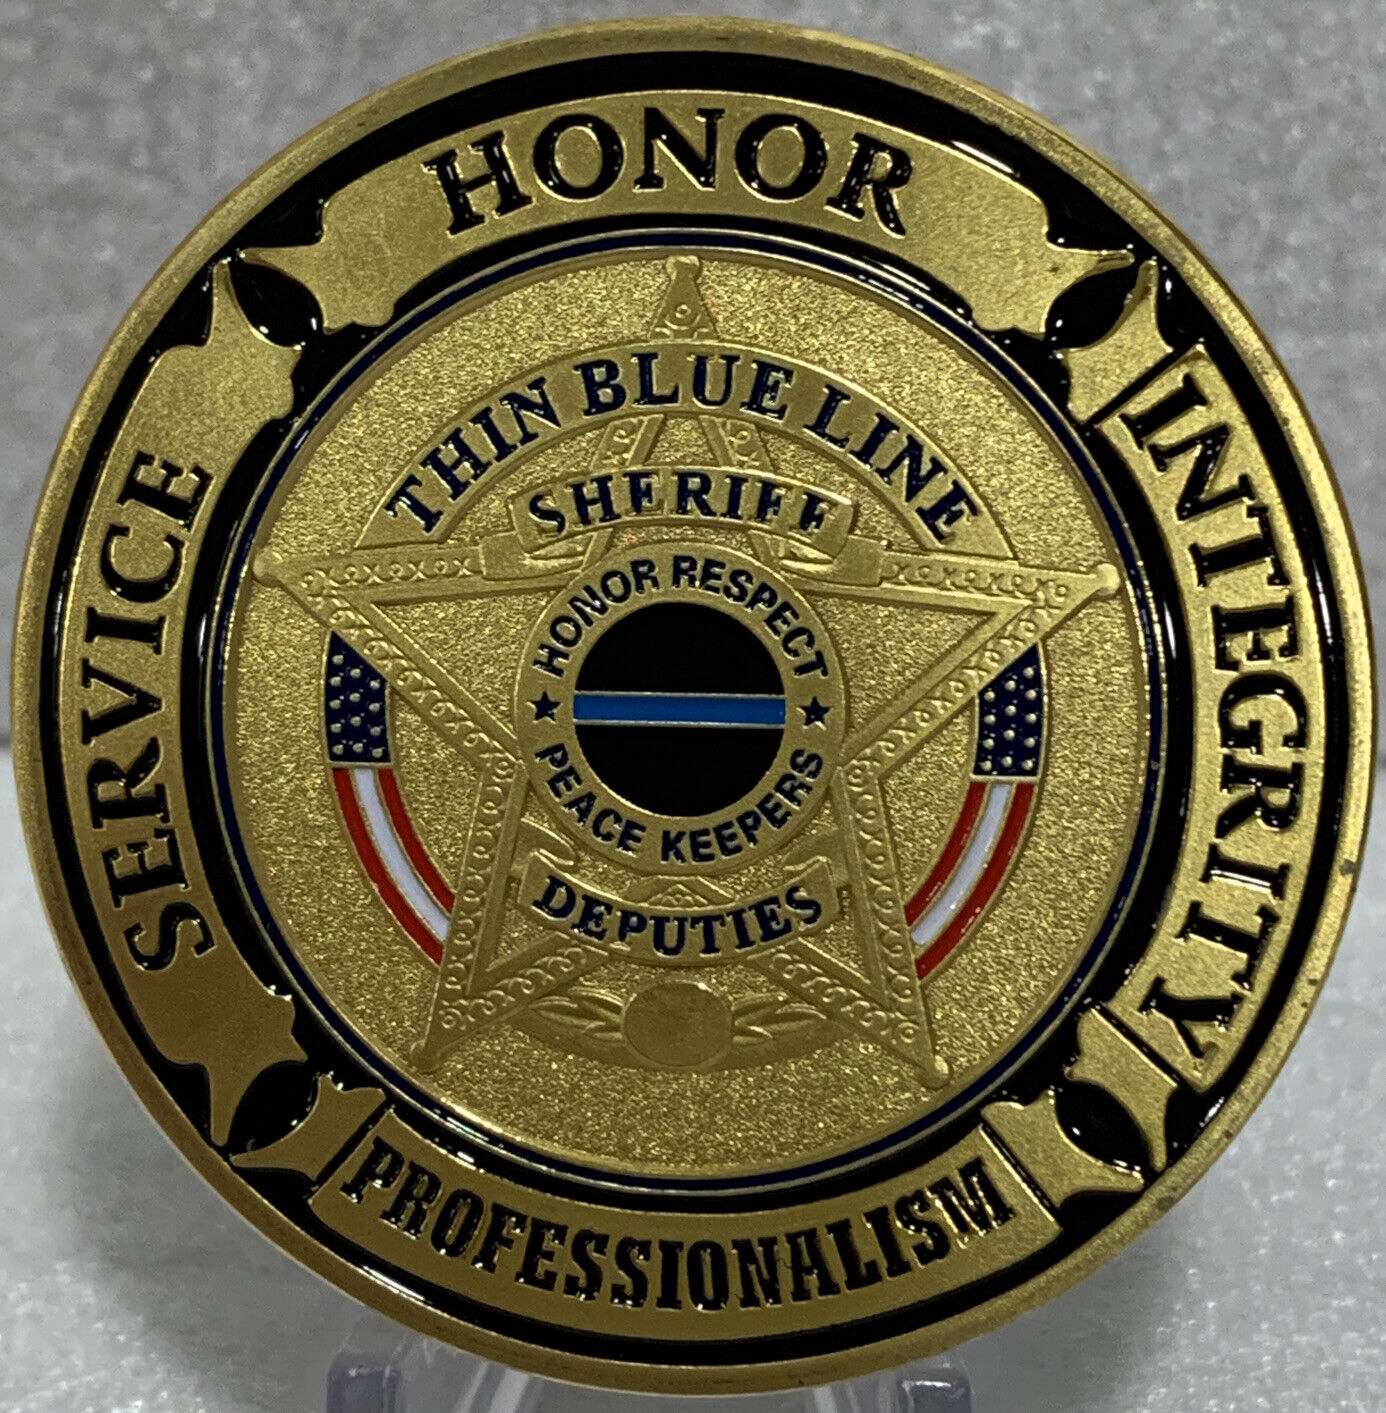 * 10 Pieces Sheriff Deputies Challenge Coin With Law Enforcement Oath In Capsule